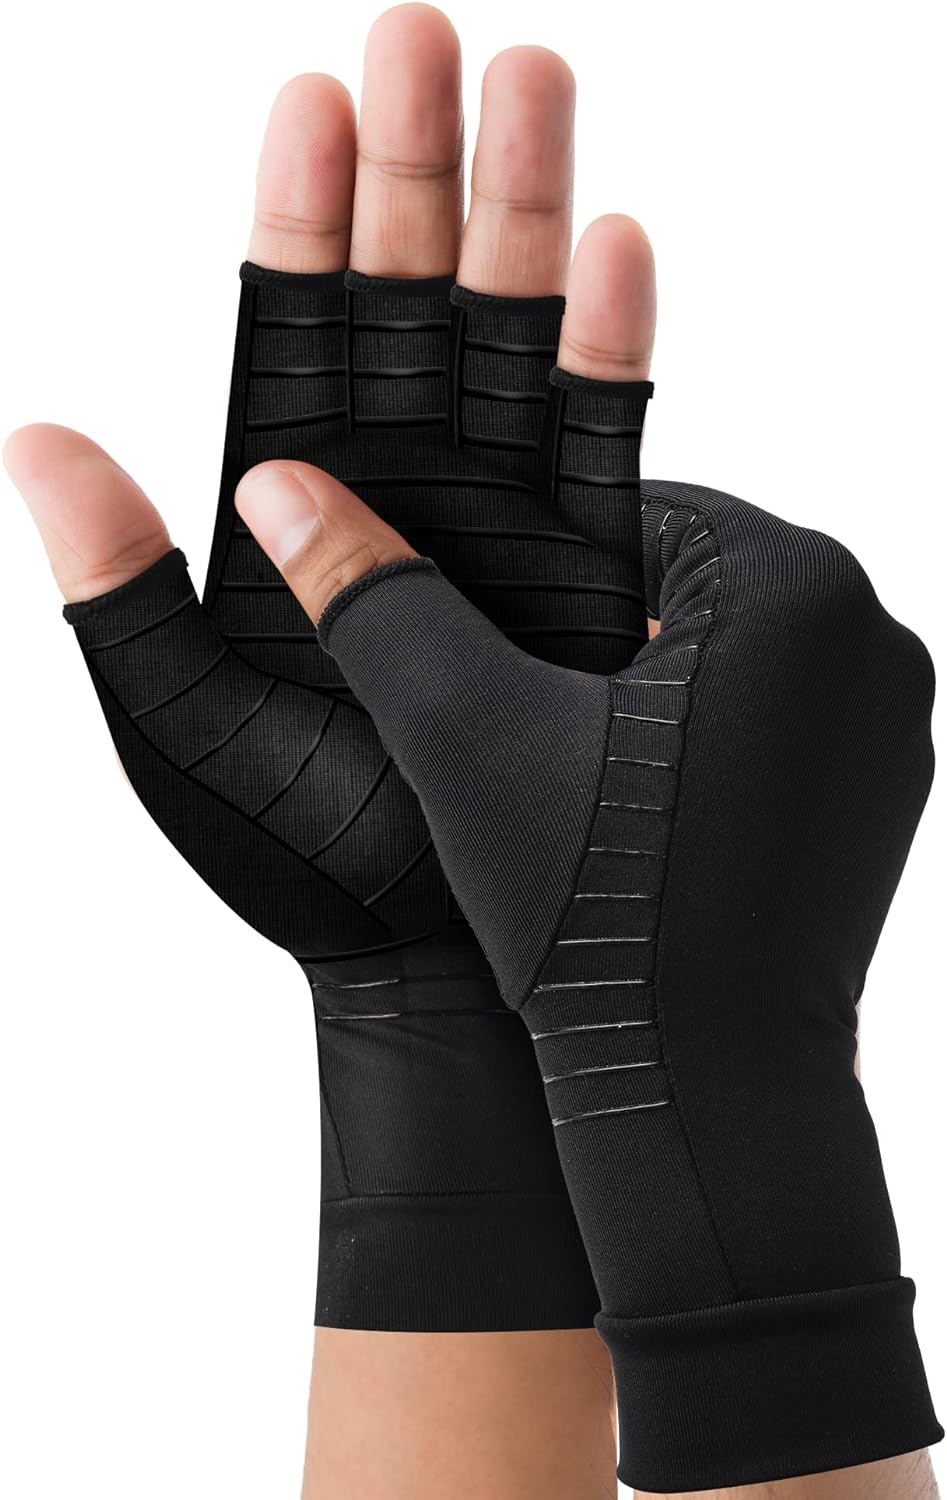 Suptrust Arthritis Gloves Compression Gloves for Arthritis for Women & Men, Relieve Hand Pain, 85% Copper Infused, Comfy Fit